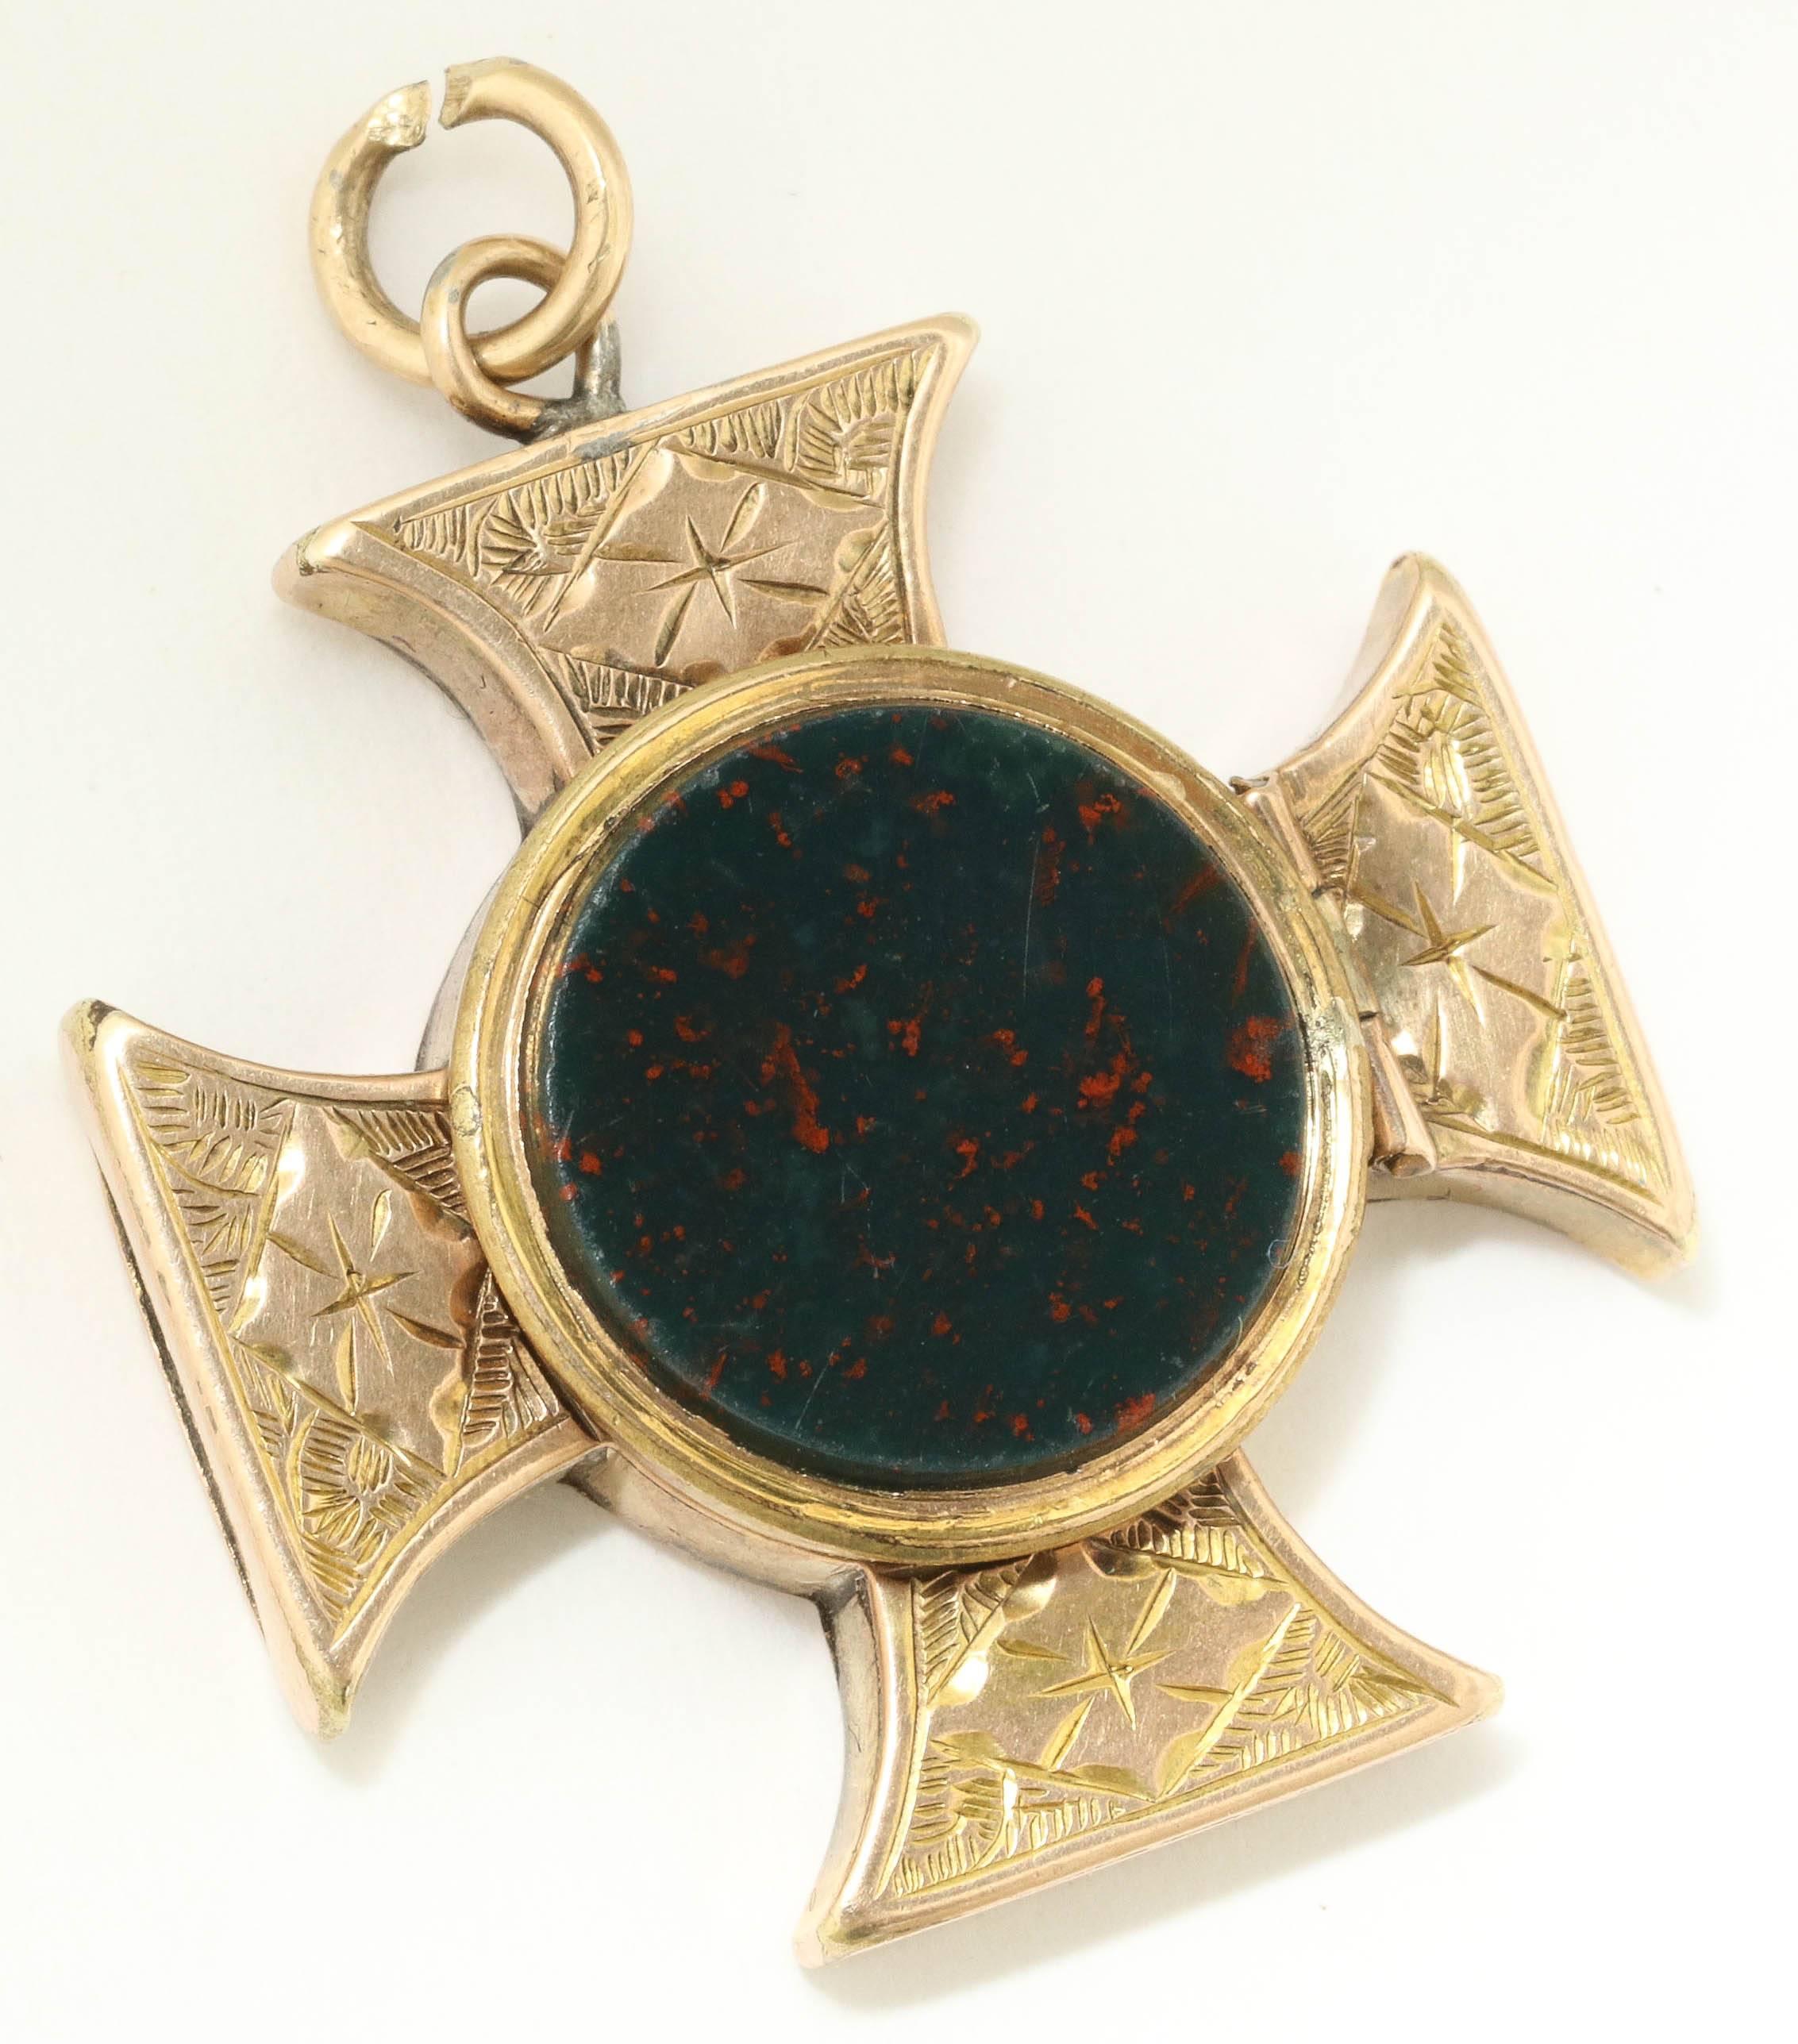 Beautifully engraved on the front and back, this maltese cross pendant is set on the front with a bloodstone and on the back can be opened to reveal a locket compartment. It is English and made in 9K yellow gold. Maltese crosses are steeped in